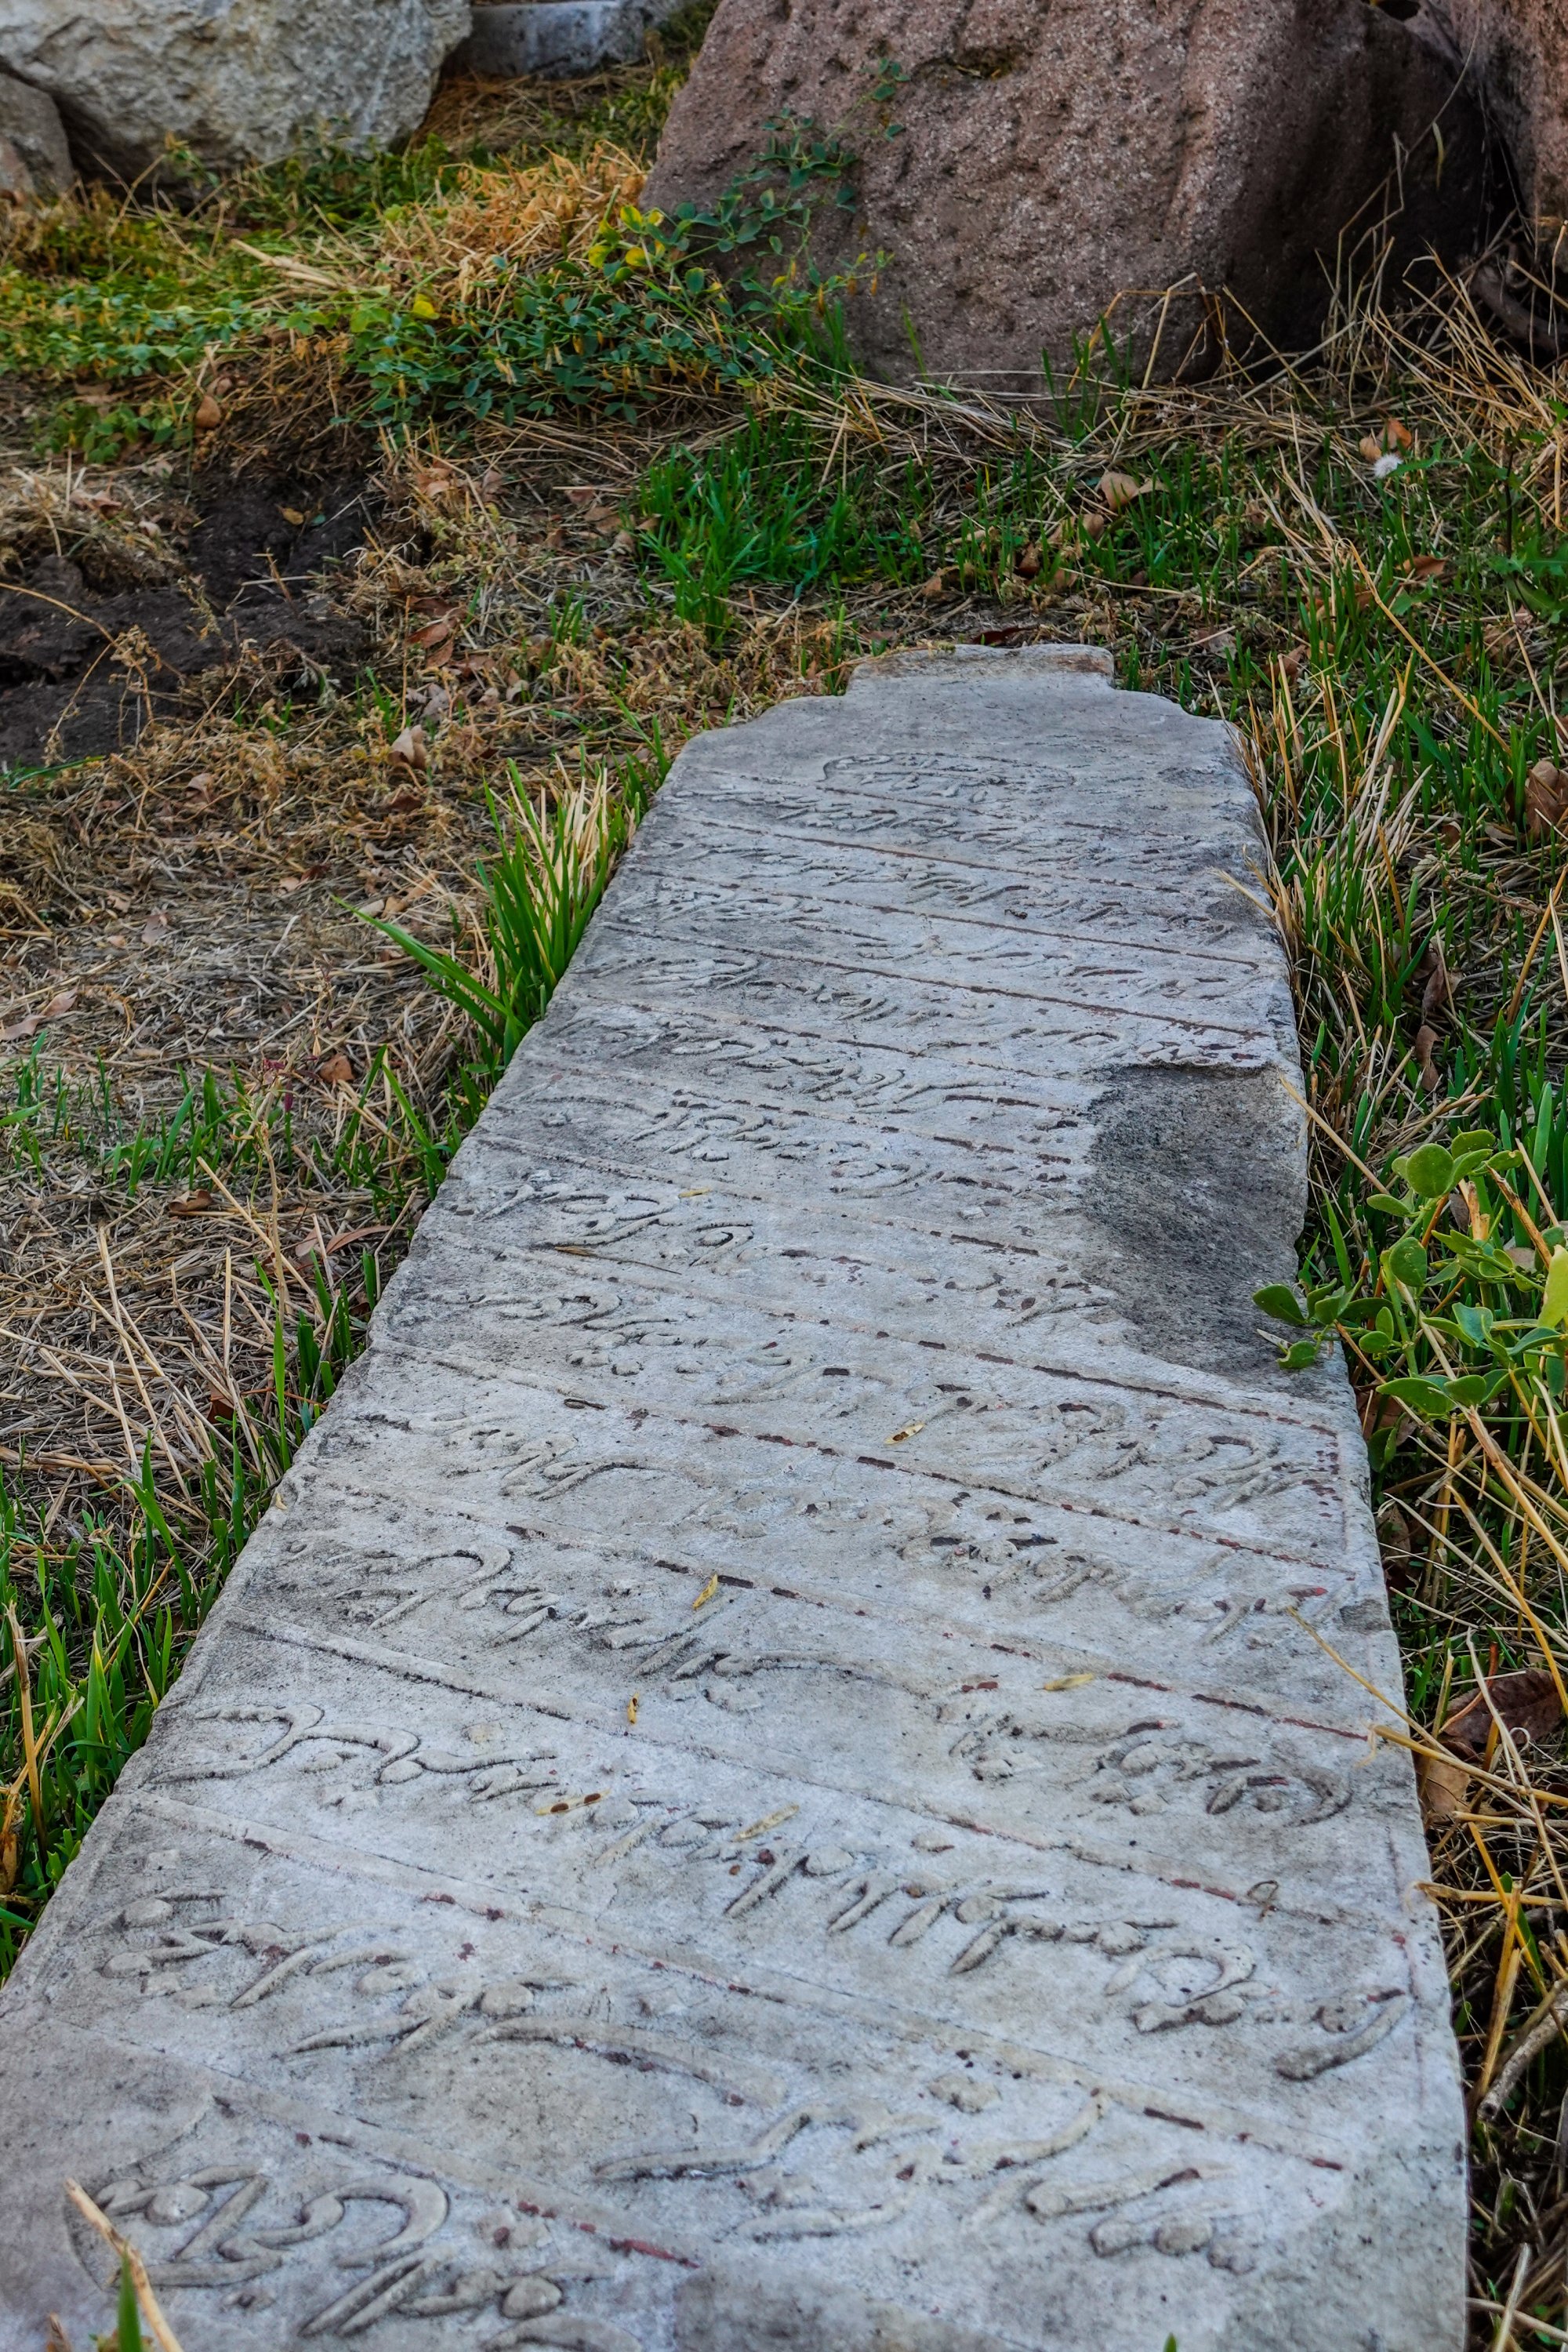 A tombstone with inscriptions in Arabic or Ottoman Turkish. (Photo by Argun Konuk)